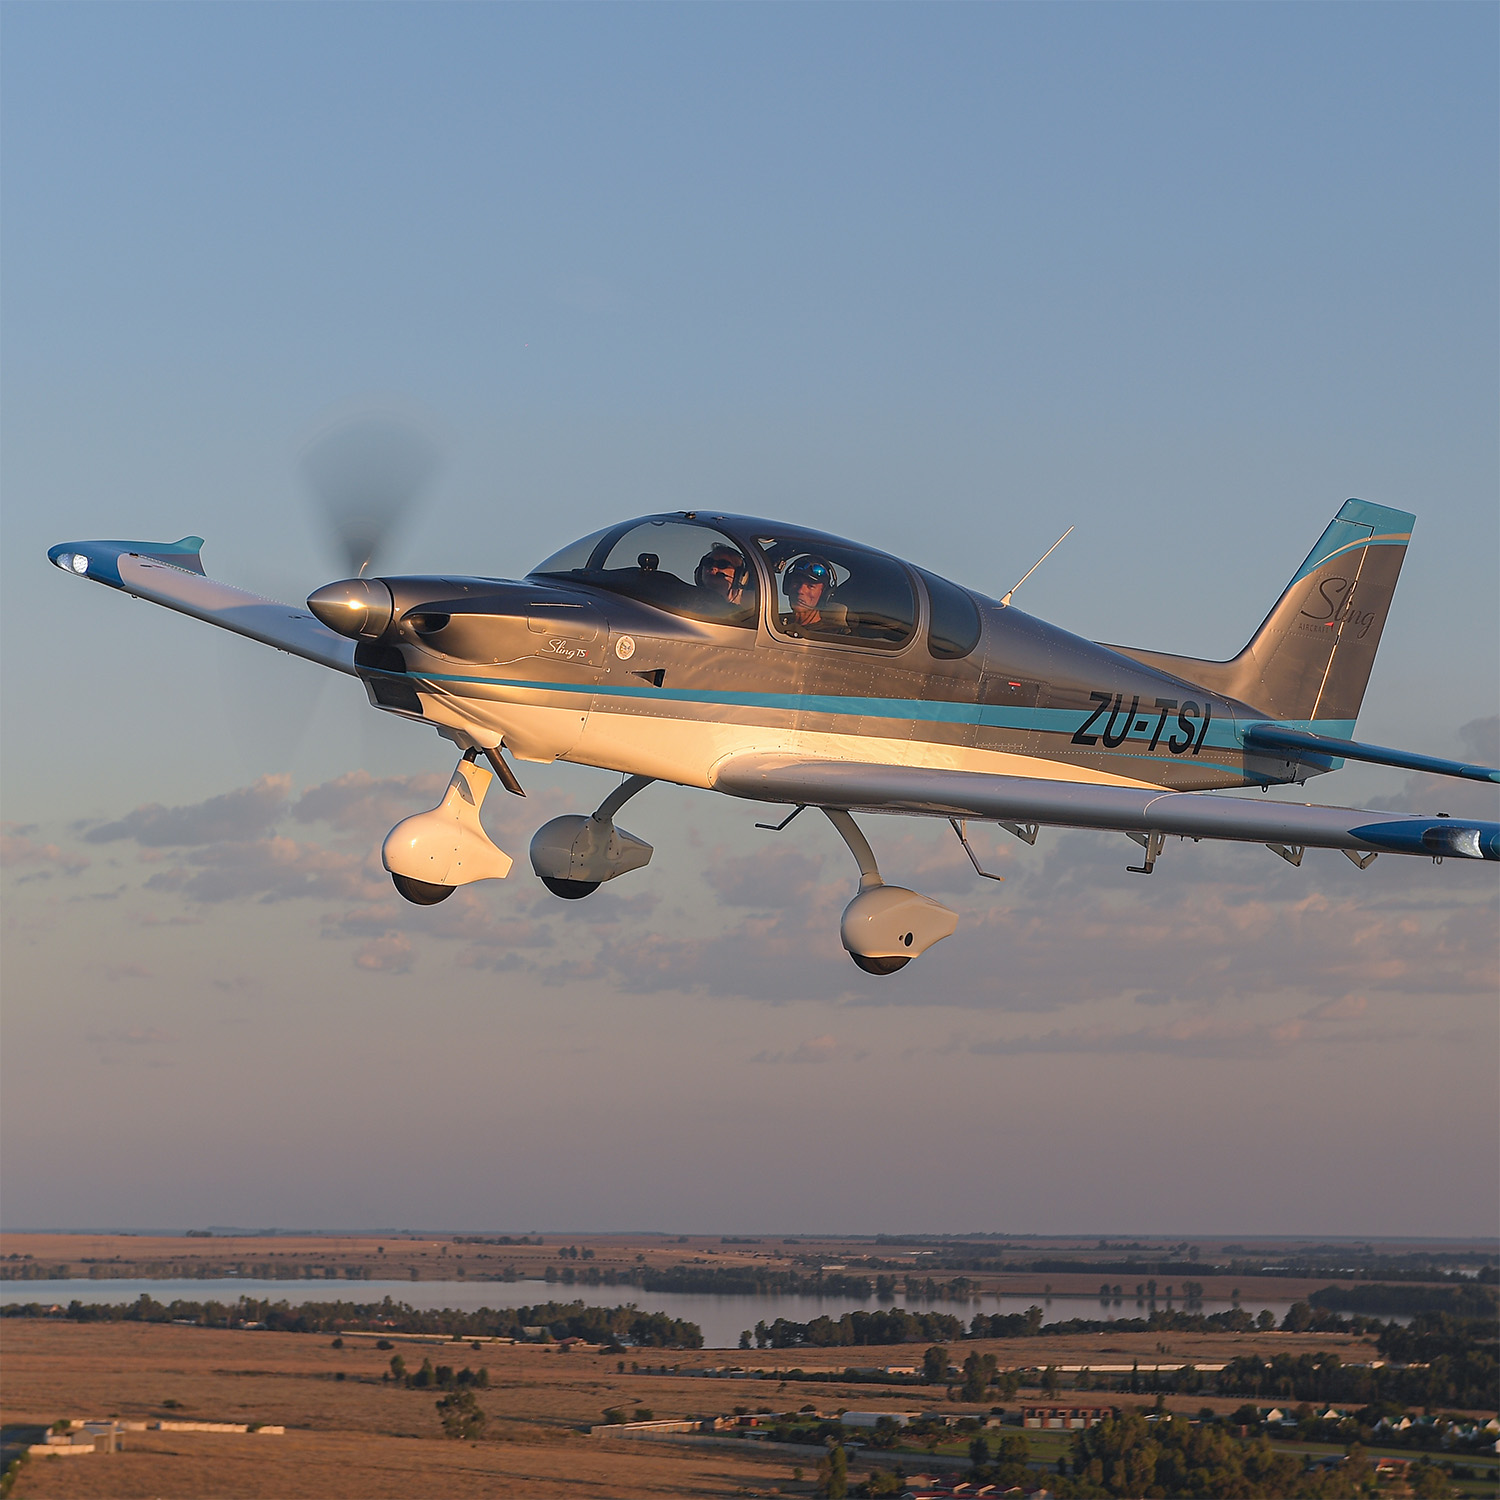 Aircraft Builders Europe, official distributor of Sling Aircraft